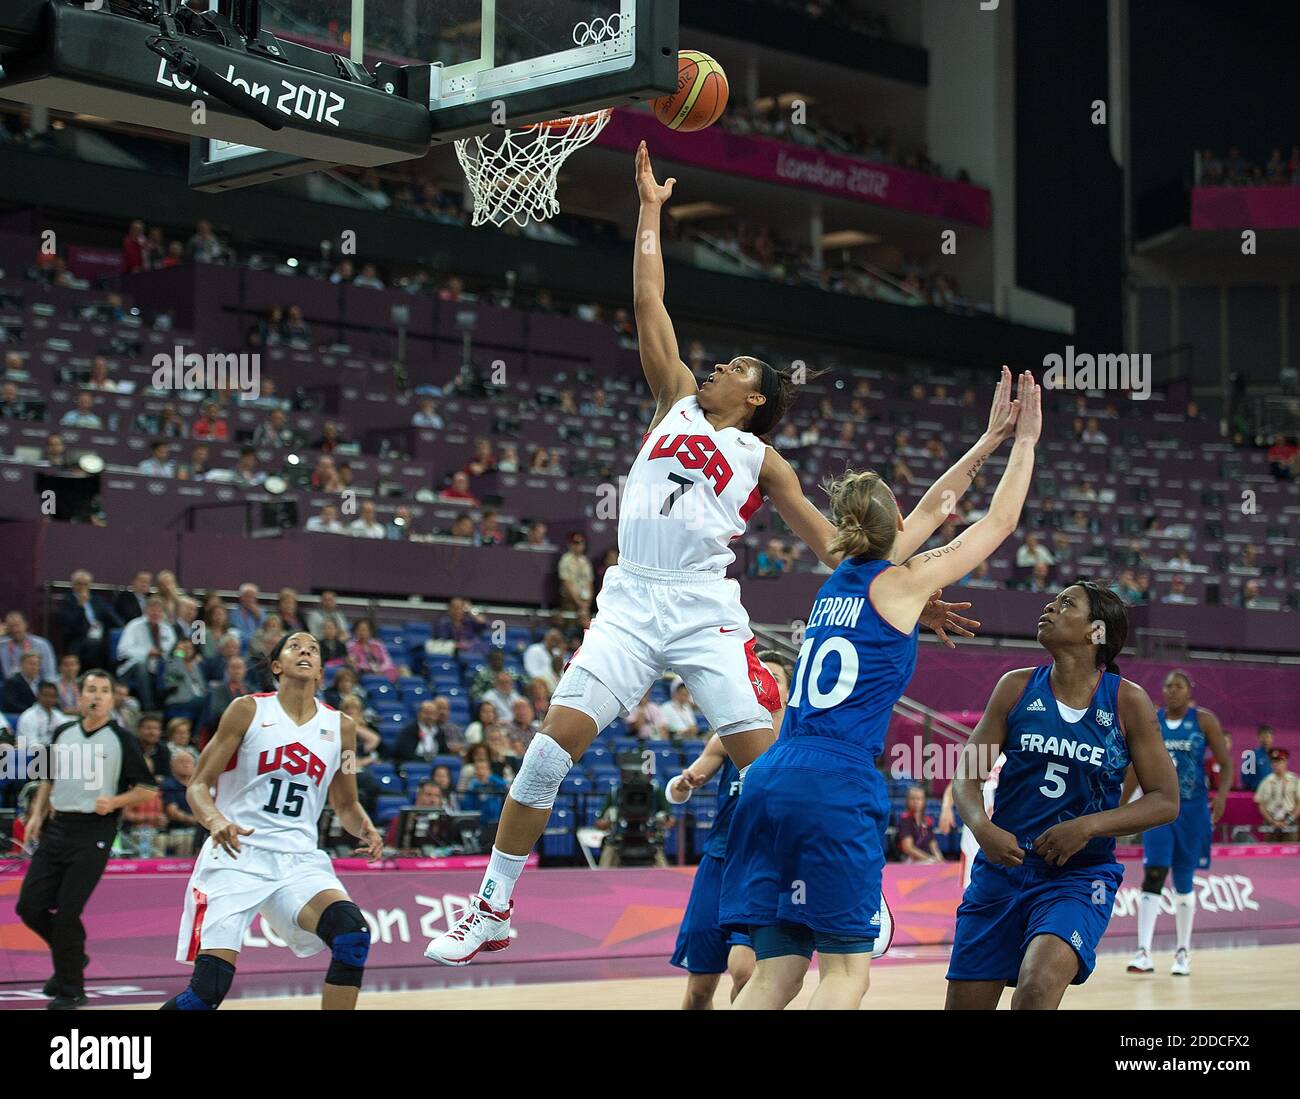 NO FILM, NO VIDEO, NO TV, NO DOCUMENTARY - USA's Maya Moore (7) glides to  the basket over France players during their Gold Medal Basketball game at  the North Greenwich Arena during